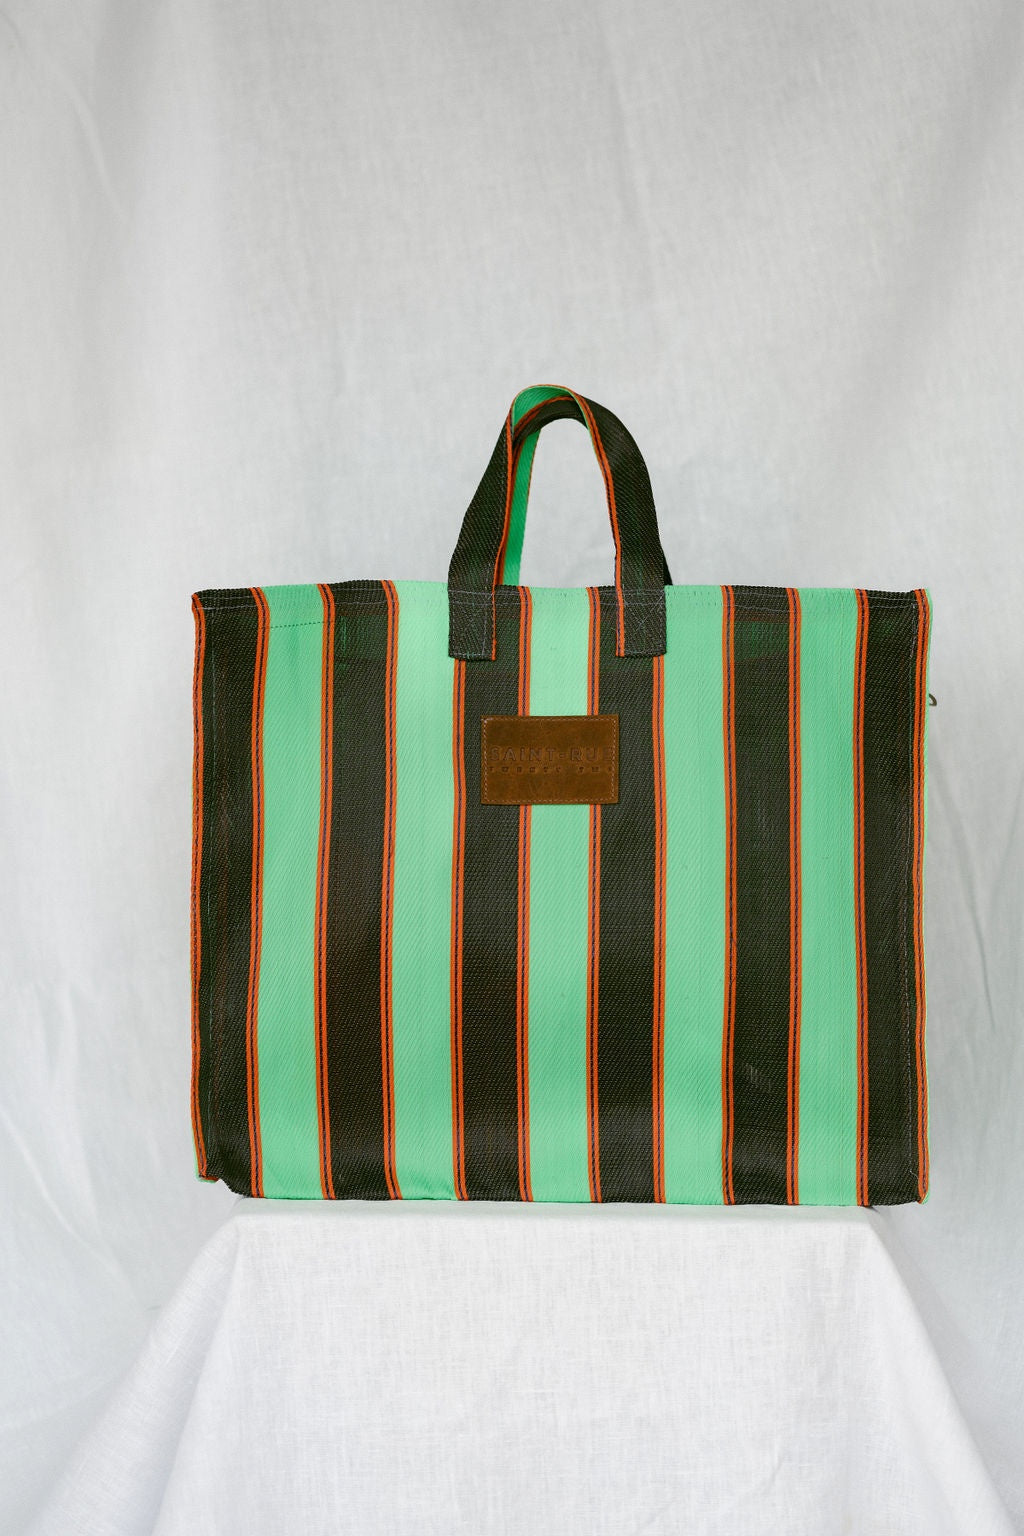 Saint Rue 22 Large Tote - Green and Brown